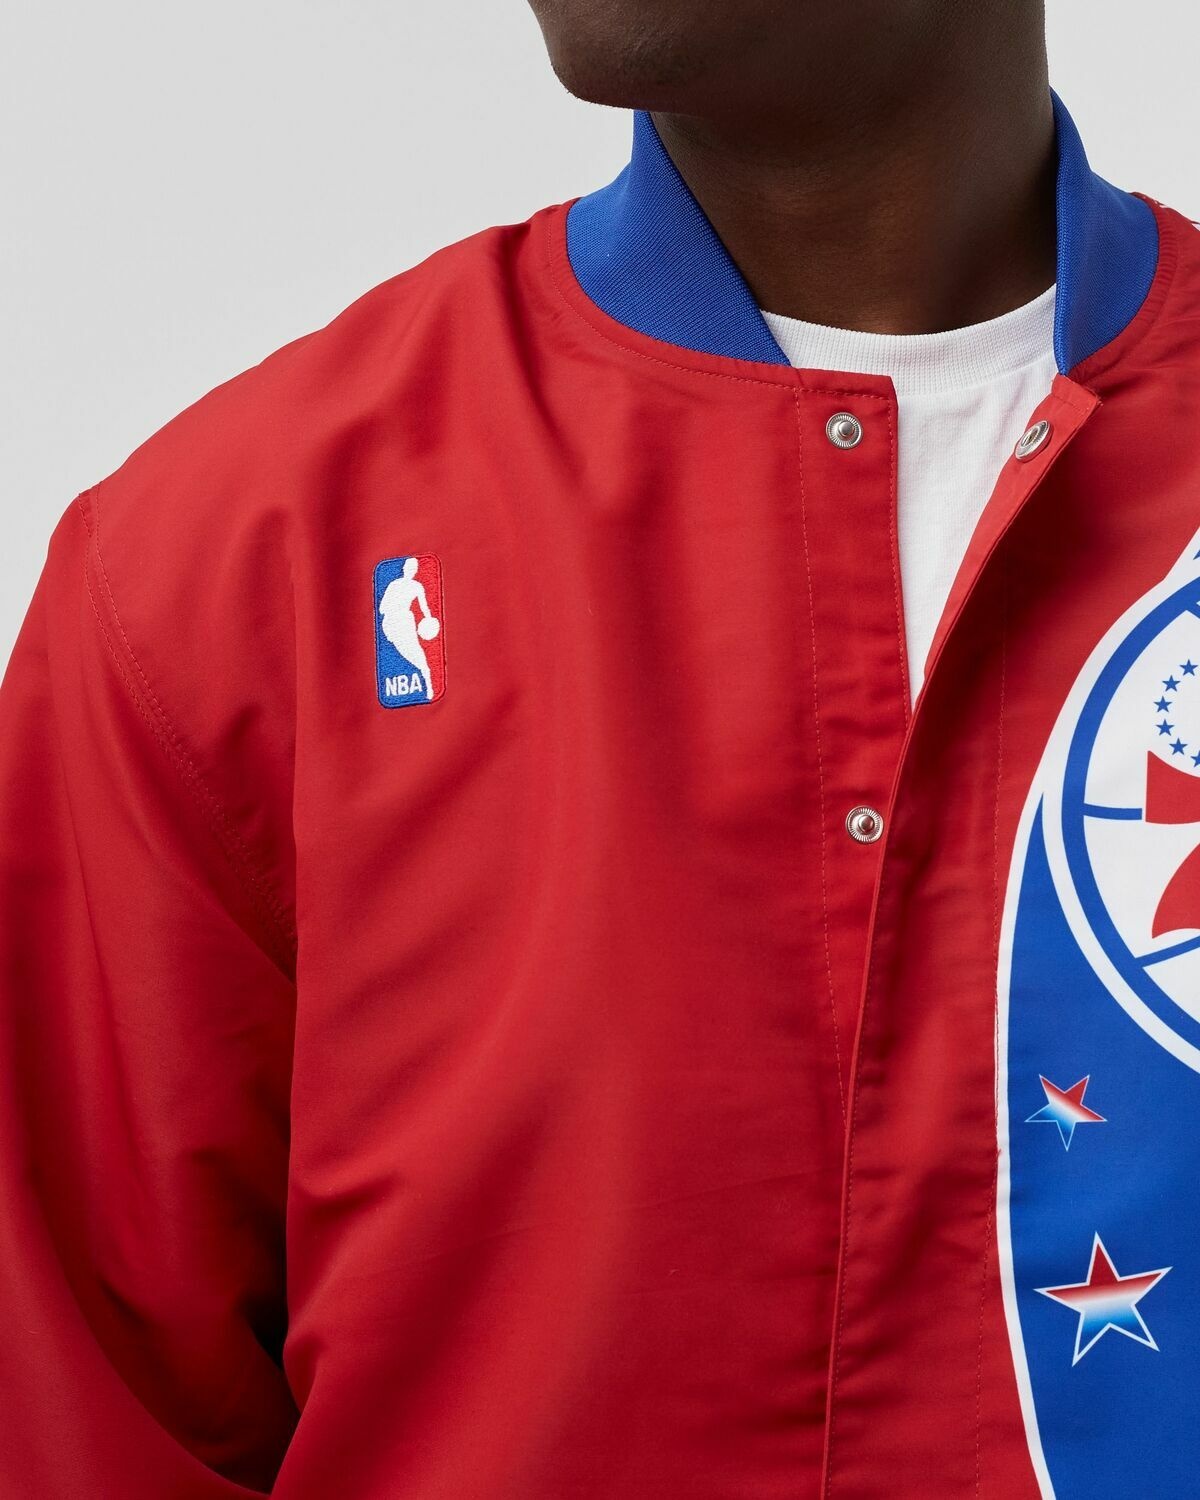 Mitchell & Ness Nba Authentic Warm Up Jacket Philadelphia 76 Ers 1993 94 Red - Mens - College Jackets/Team Jackets